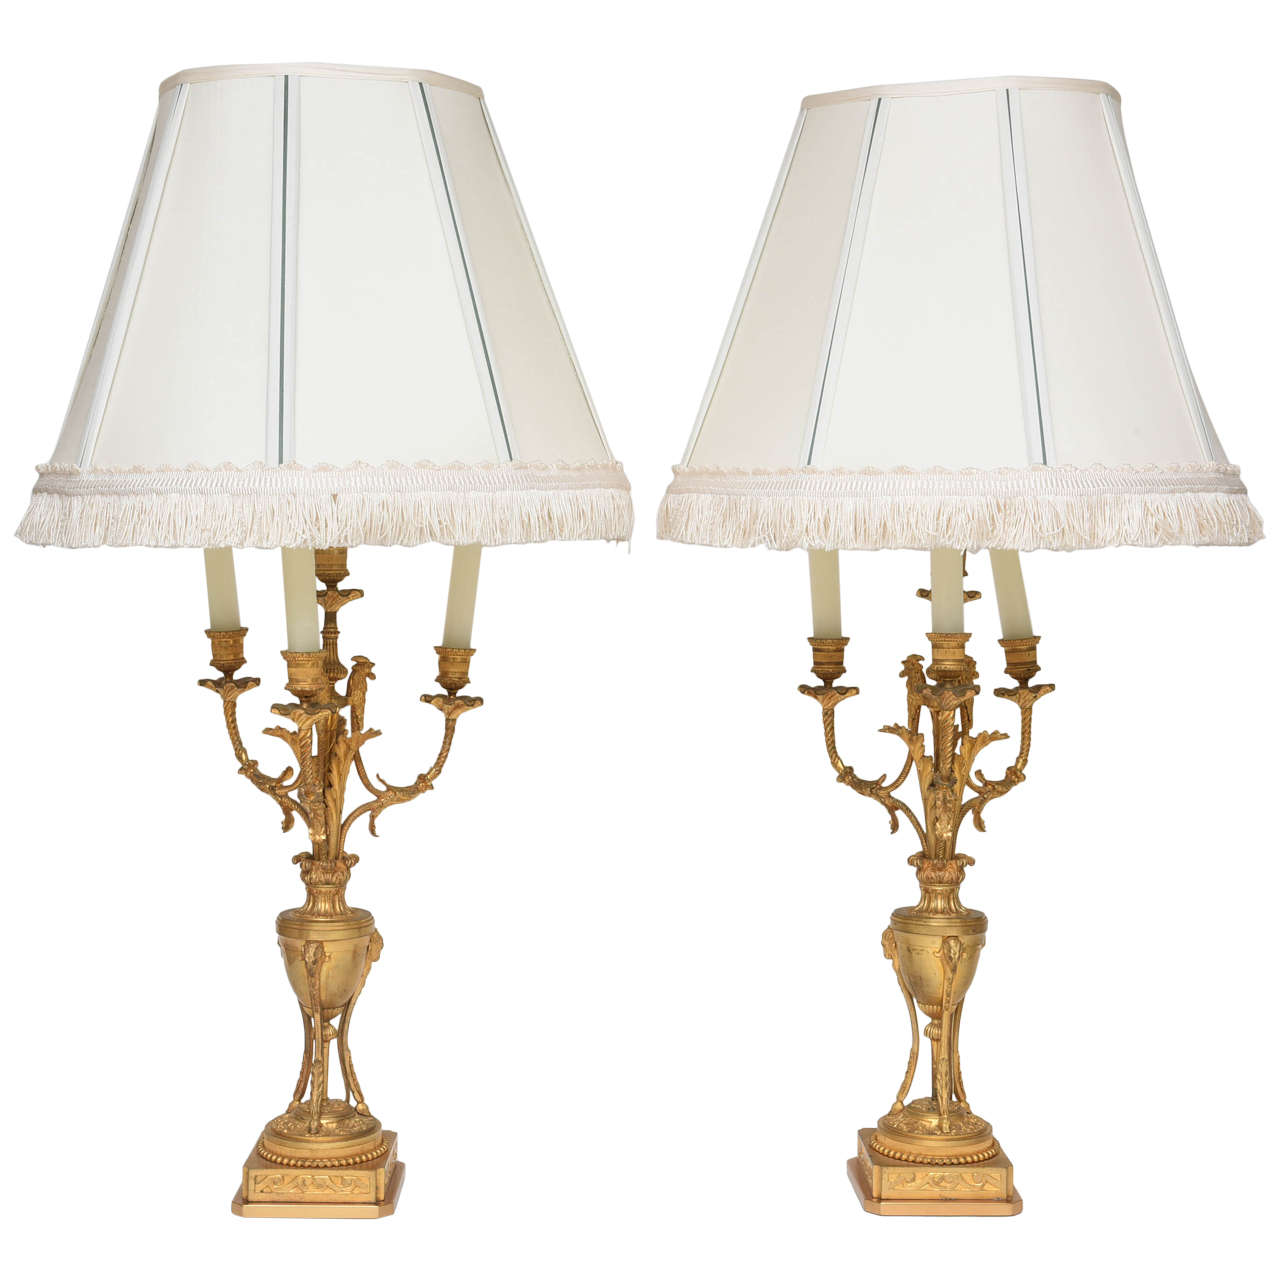 Superb Pair of French Neoclassical Ormolu Candelabra Lamps